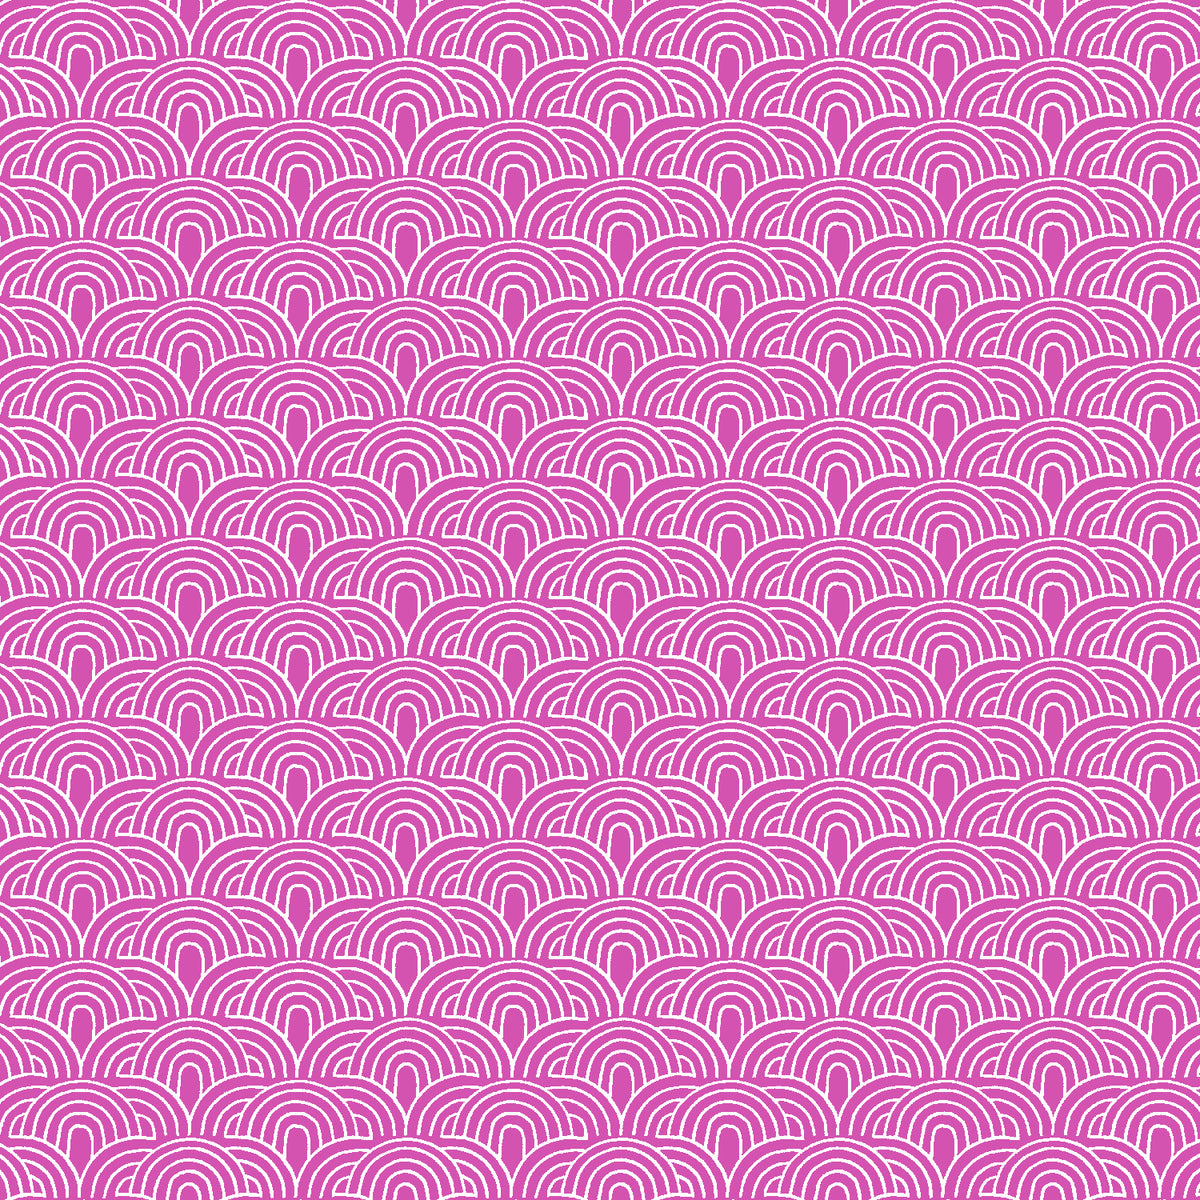 Love Pink Quilt Fabric - Pink Ribbons on White - 52028-1 – Cary